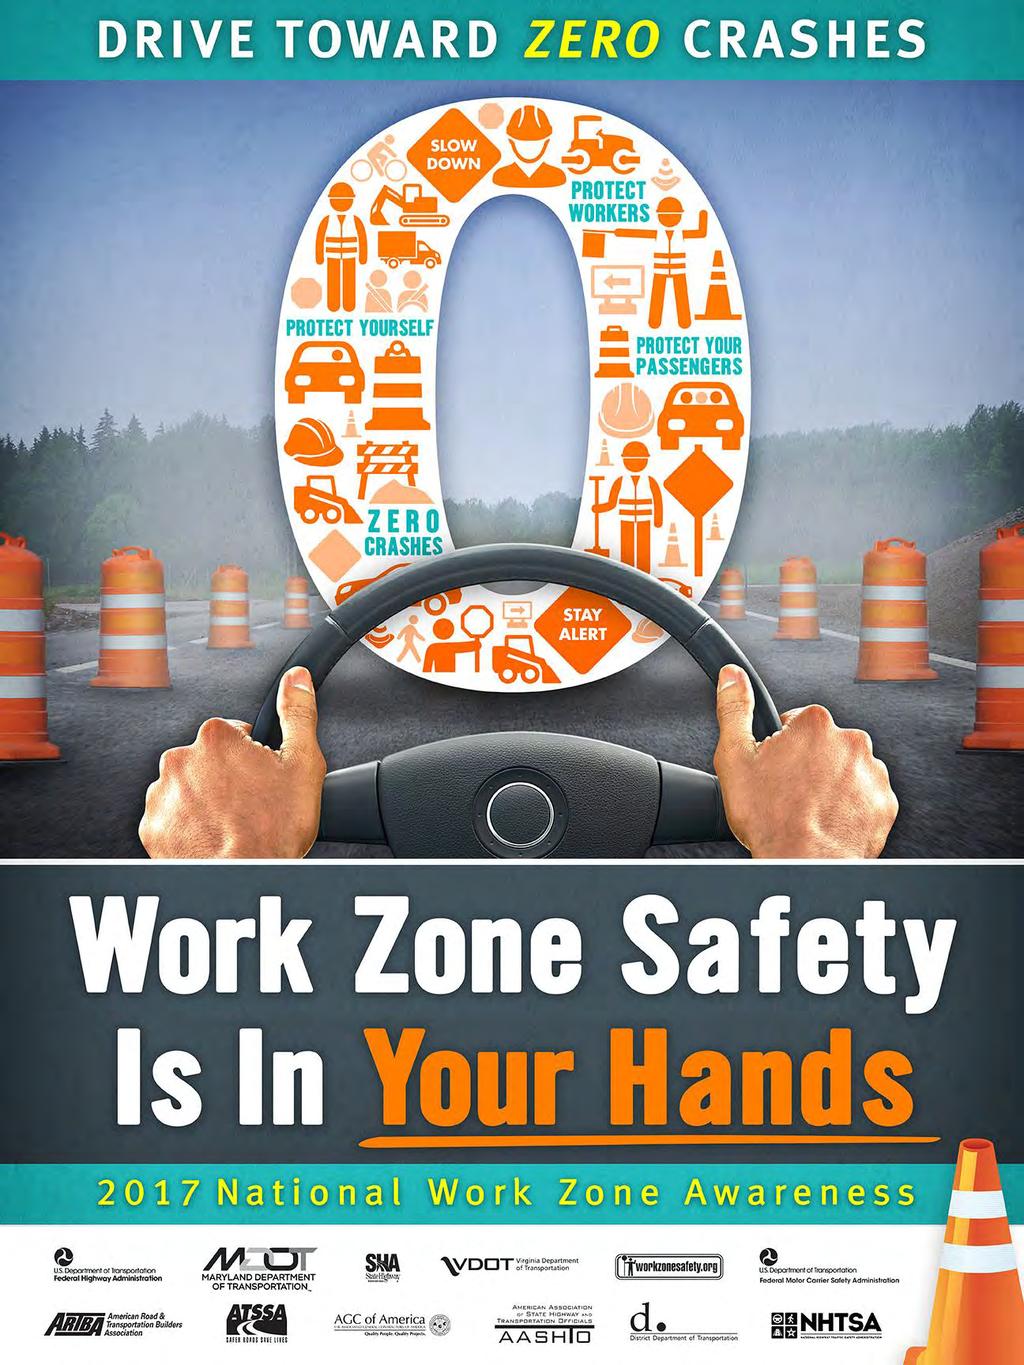 Work Zone Safety Message Be Patient Minimize Distractions Give your full attention to navigating